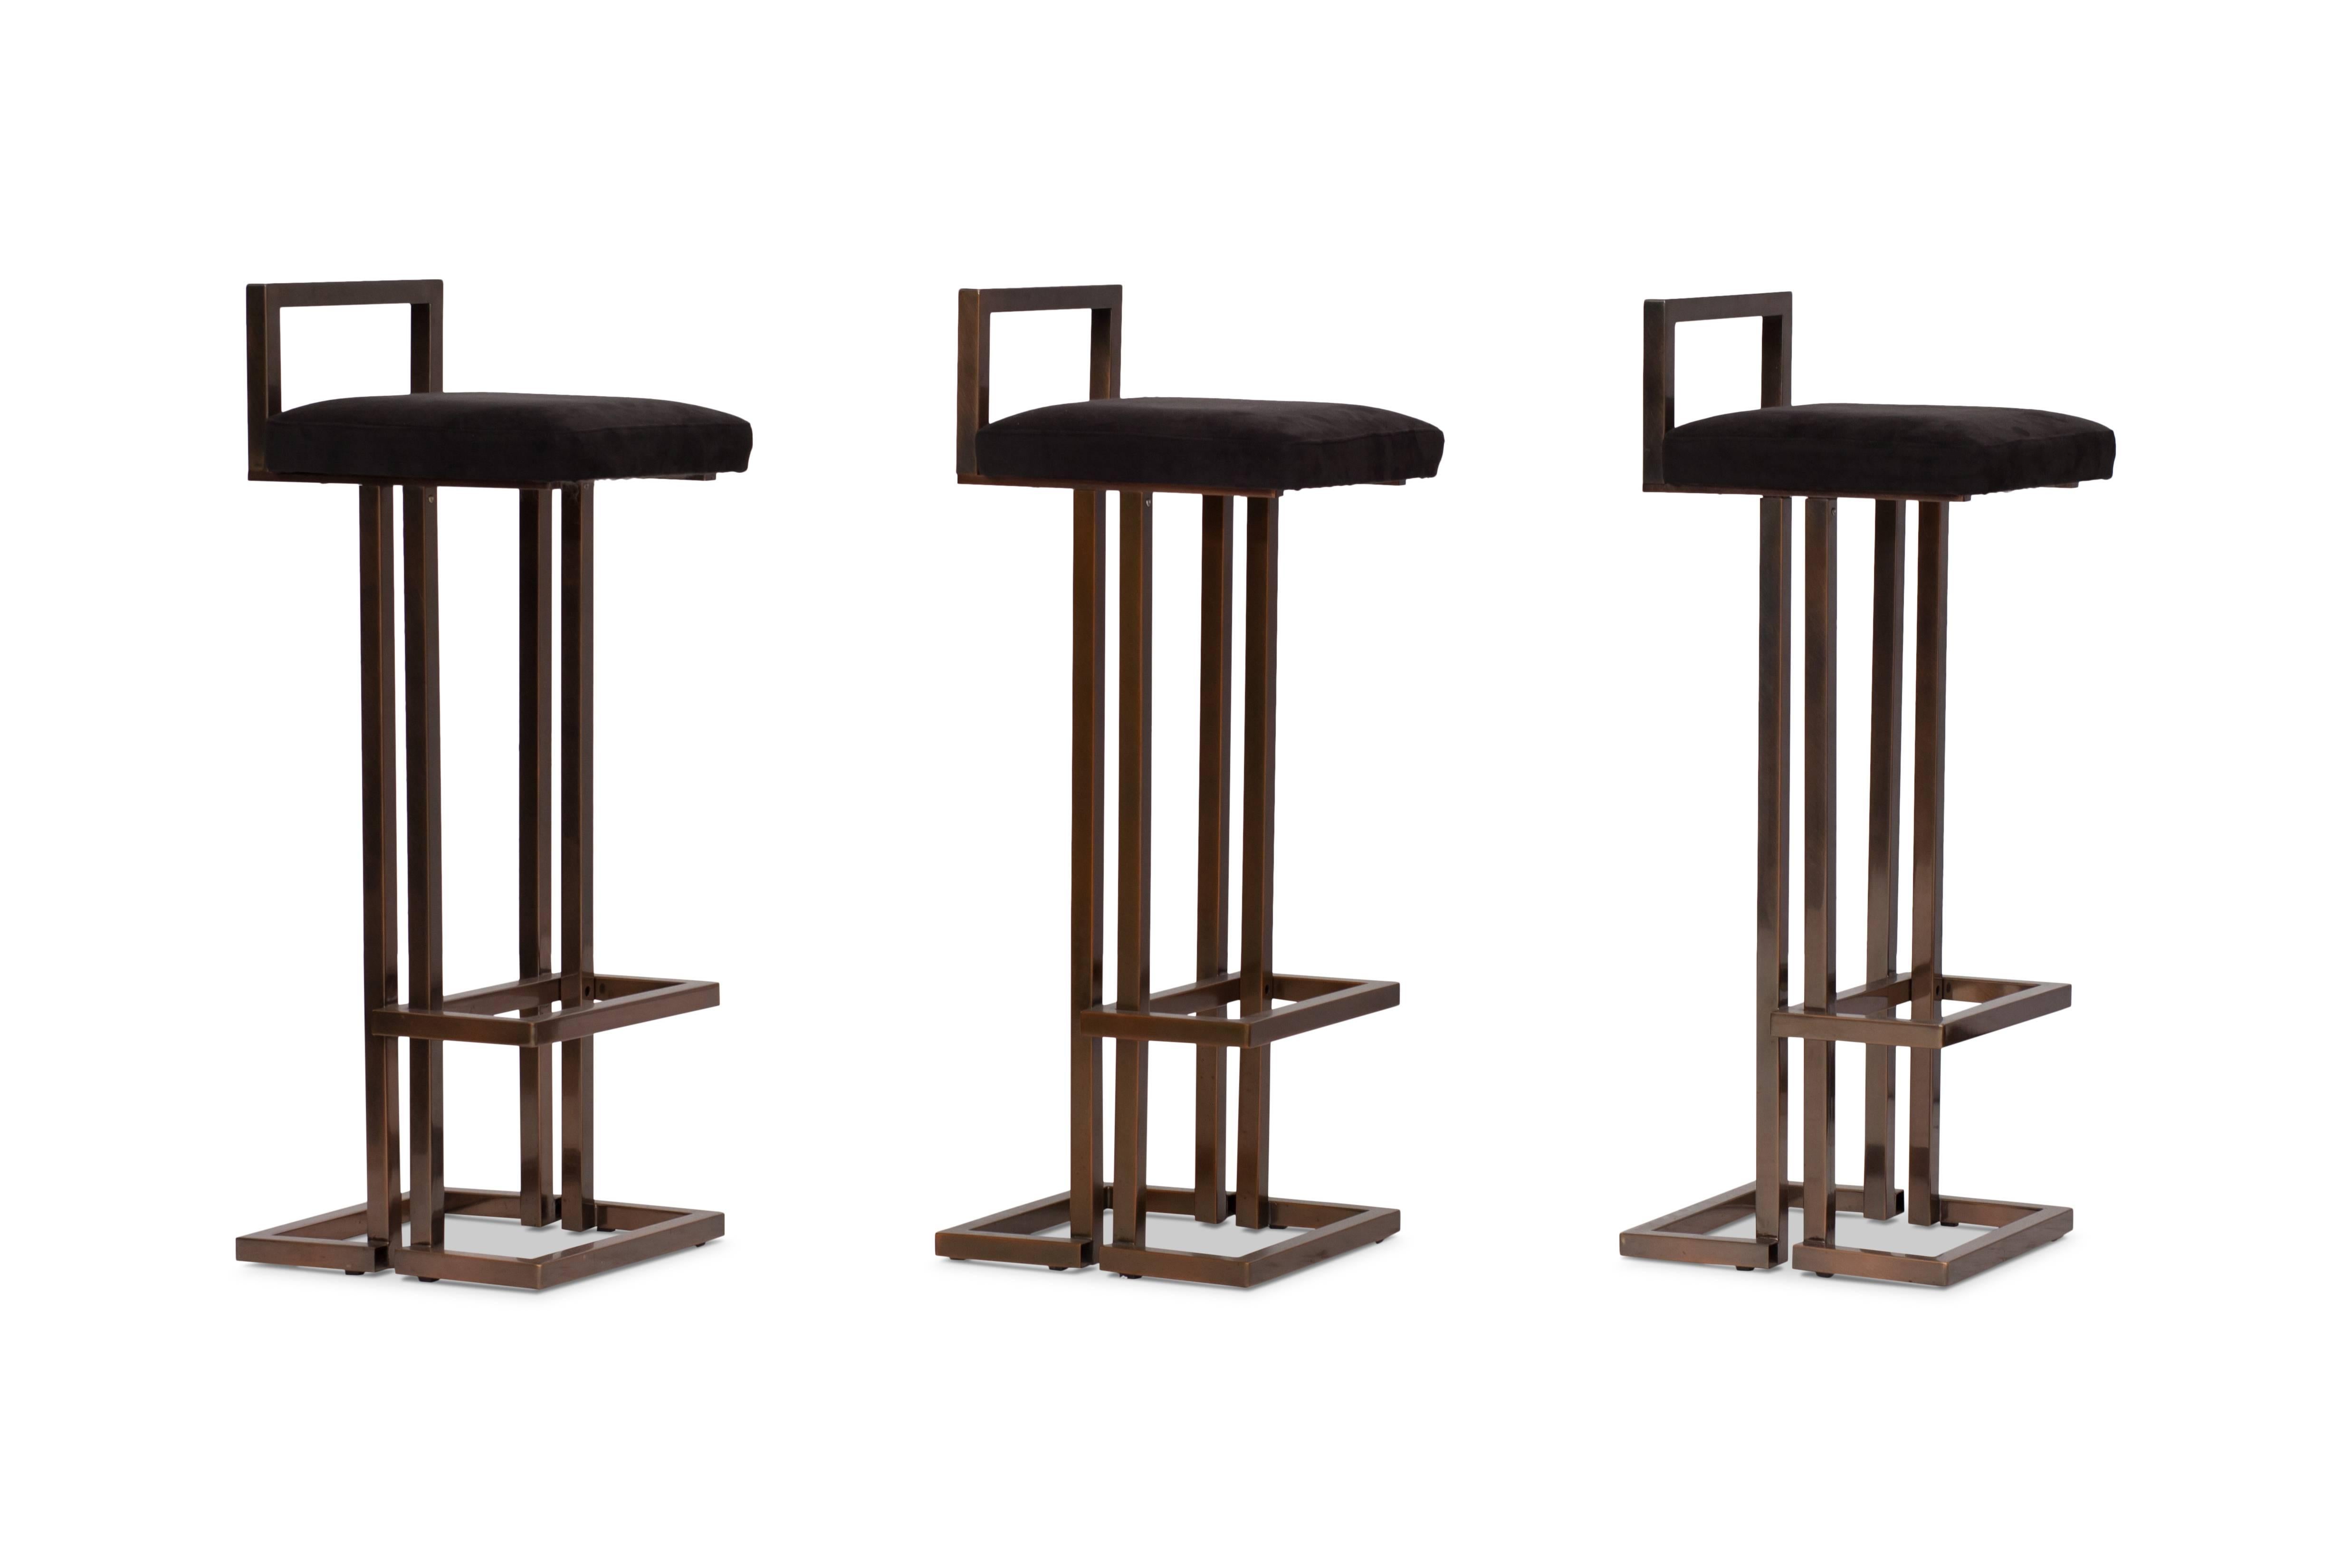 Set of three bar stools in red copper, patinated steel frame and back velvet seating.

We also have three matching bar elements available

Maison Jansen, France, 1970s

Measure: H 95 cm x SH 85 cm x W 35 cm x D 38 cm.